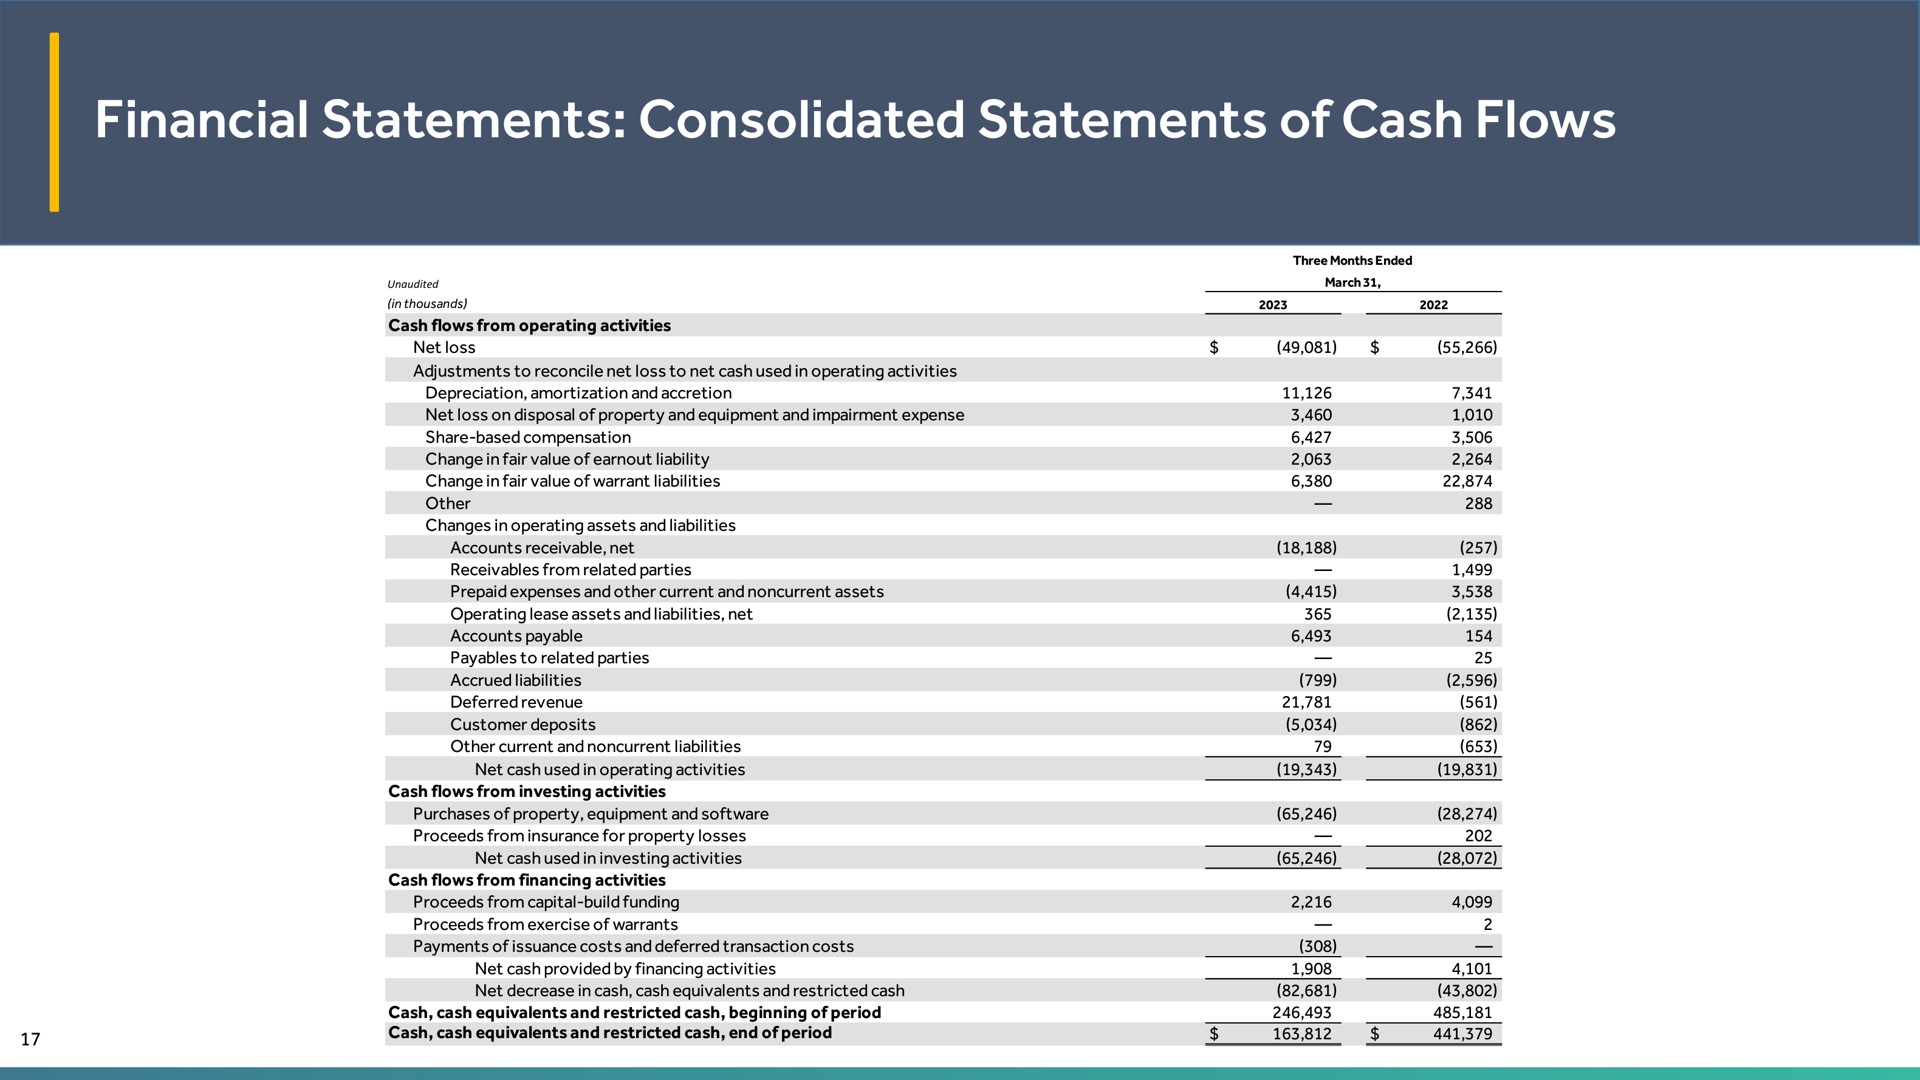 financial statements consolidated statements of cash flows | EVgo